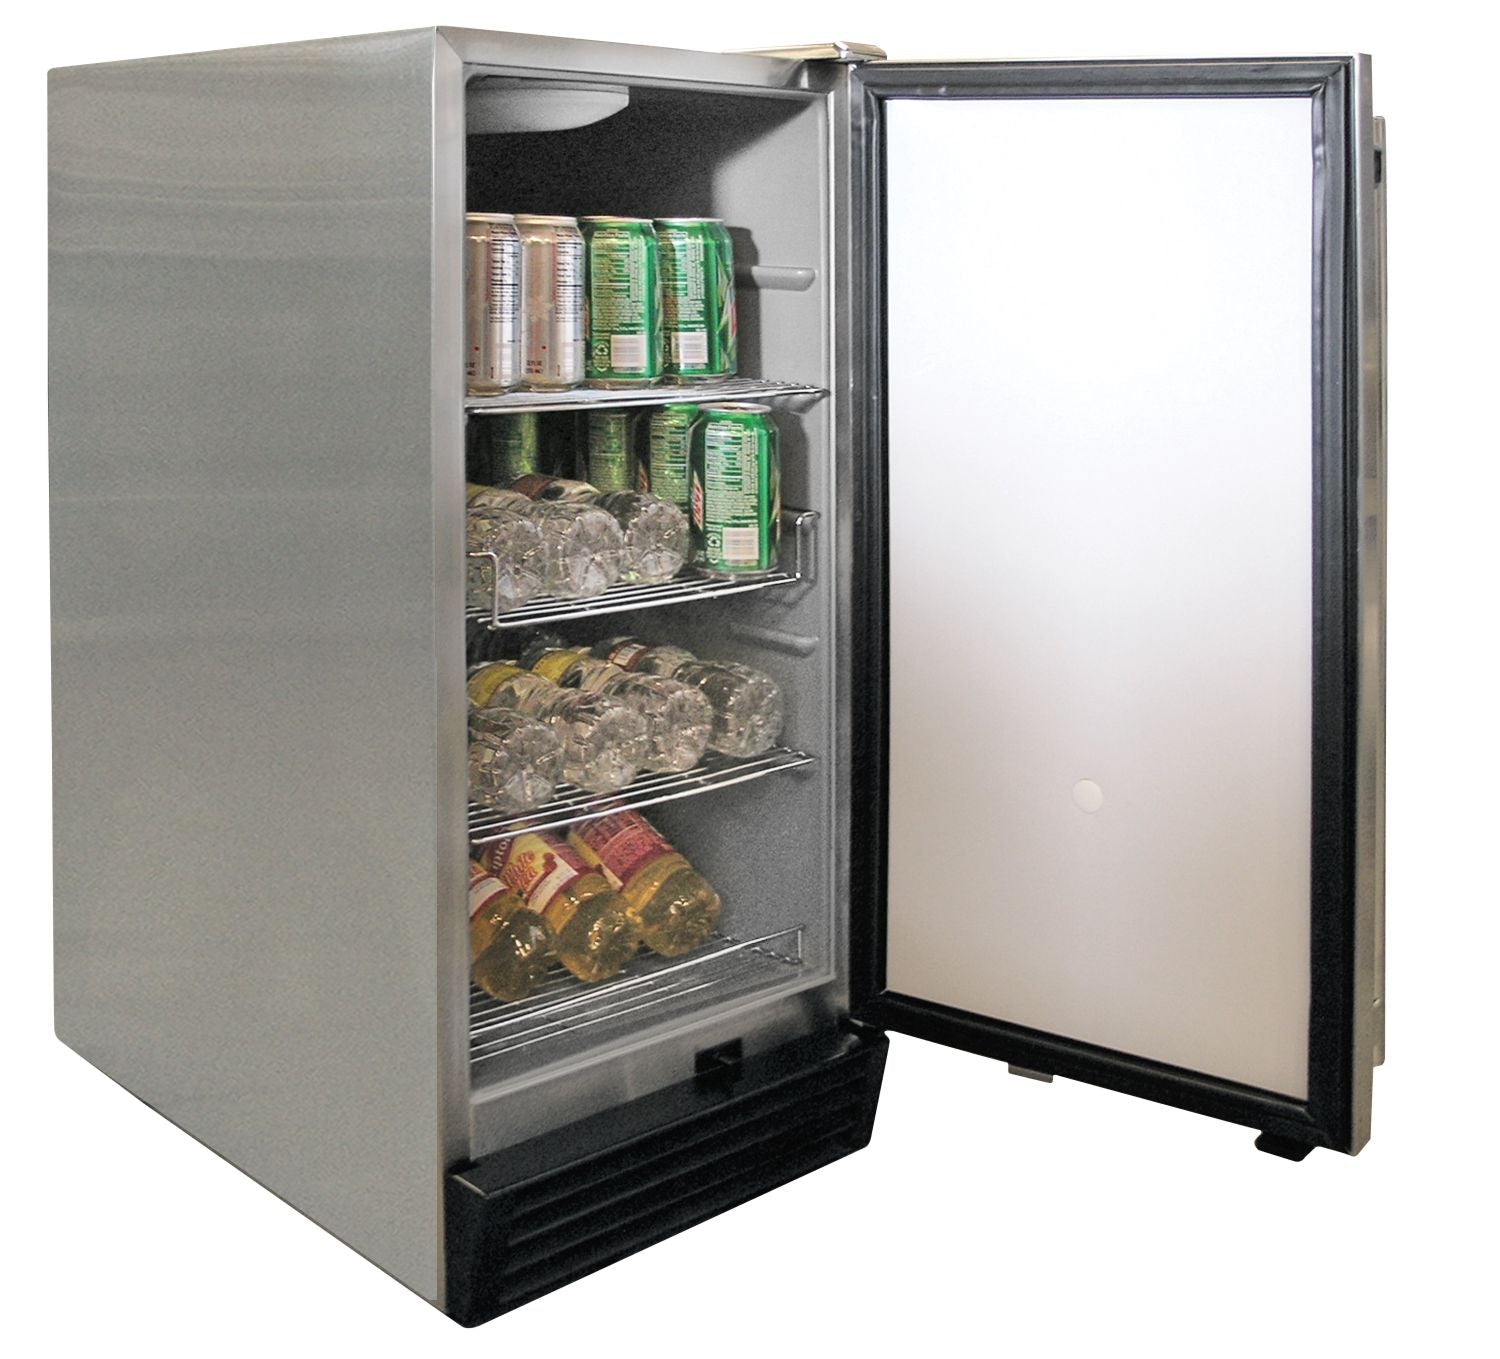 Outdoor Stainless Steel Refrigerator-Novel Home